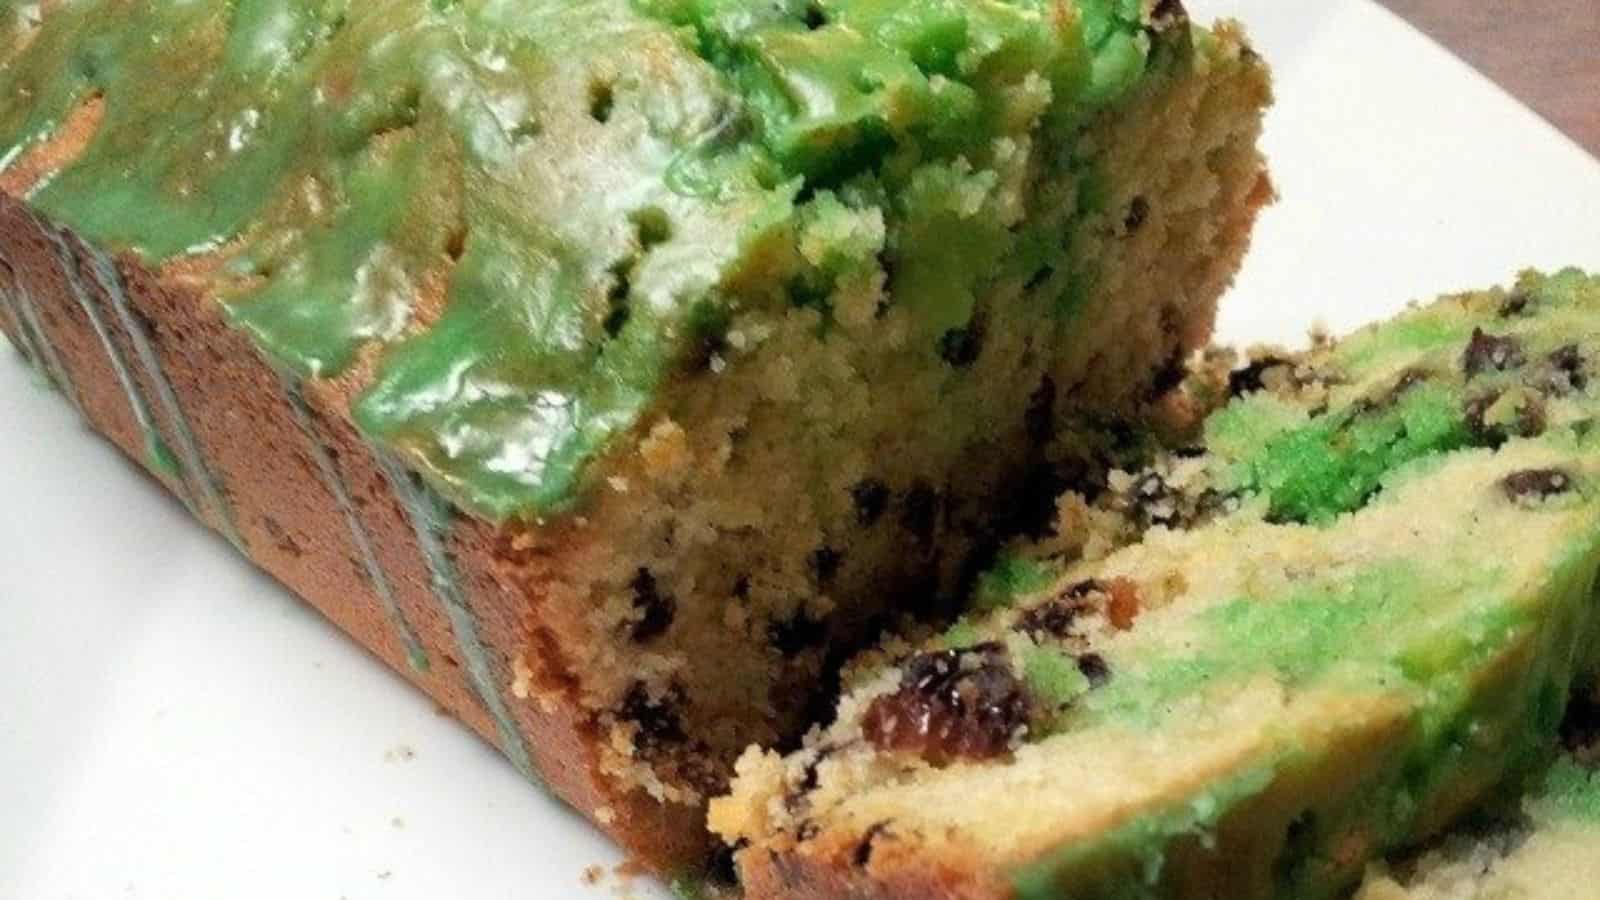 Image shows A slice of an Irish tea cake with green icing is on a plate.